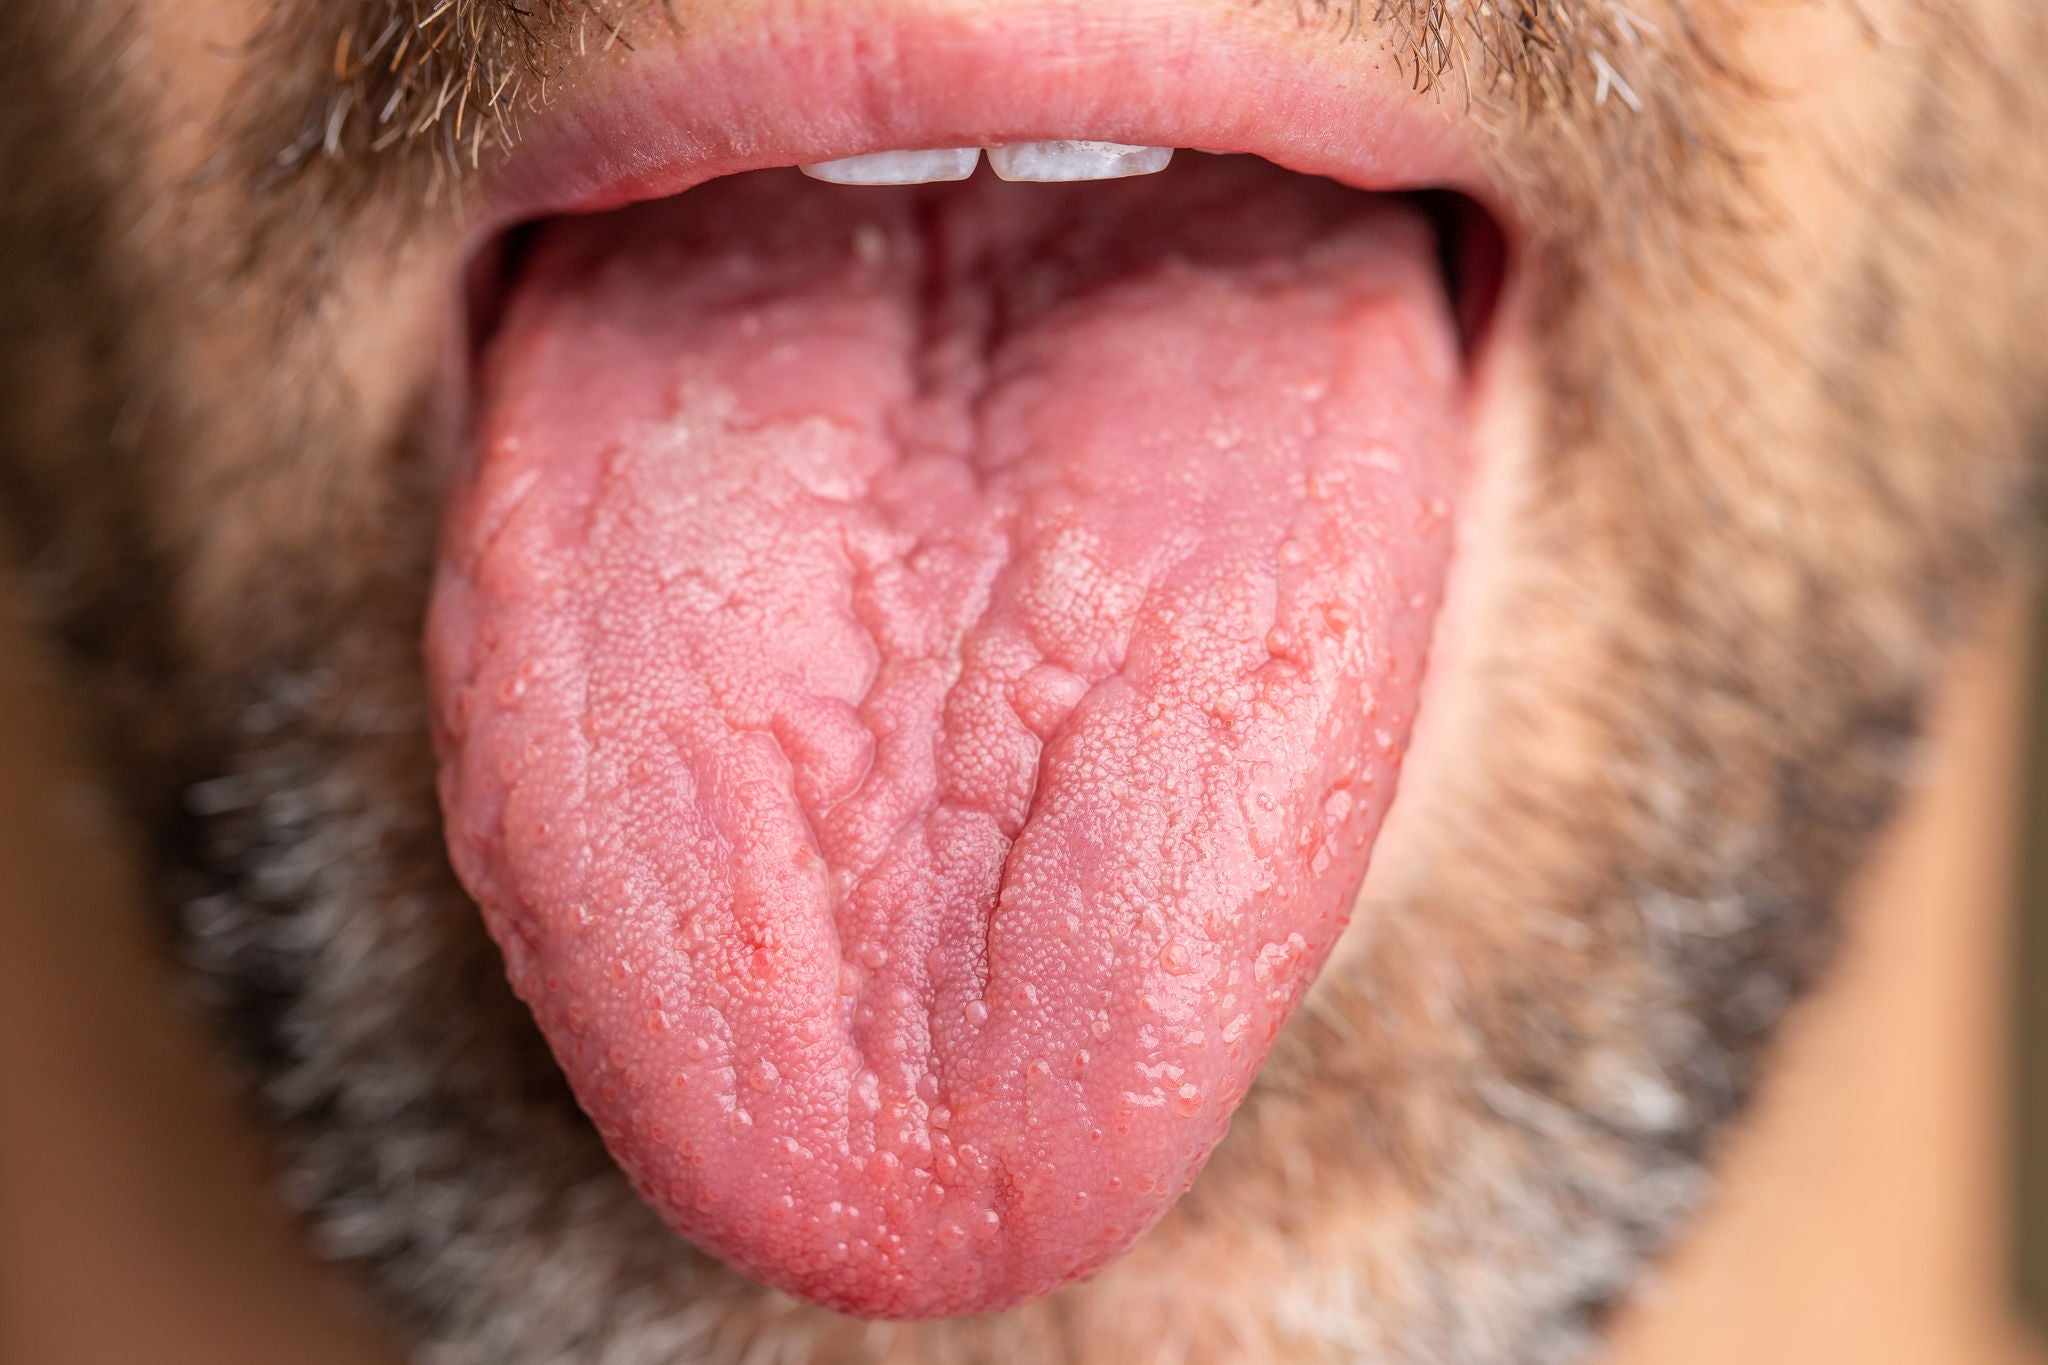 A white male with brown and white facial hair. Tongue is sticking out to show geographic tongue, also known as benign migratory glossitis where lines form and can cause pain or discomfort., A white male with brown and white facial hair. Tongue is stickin